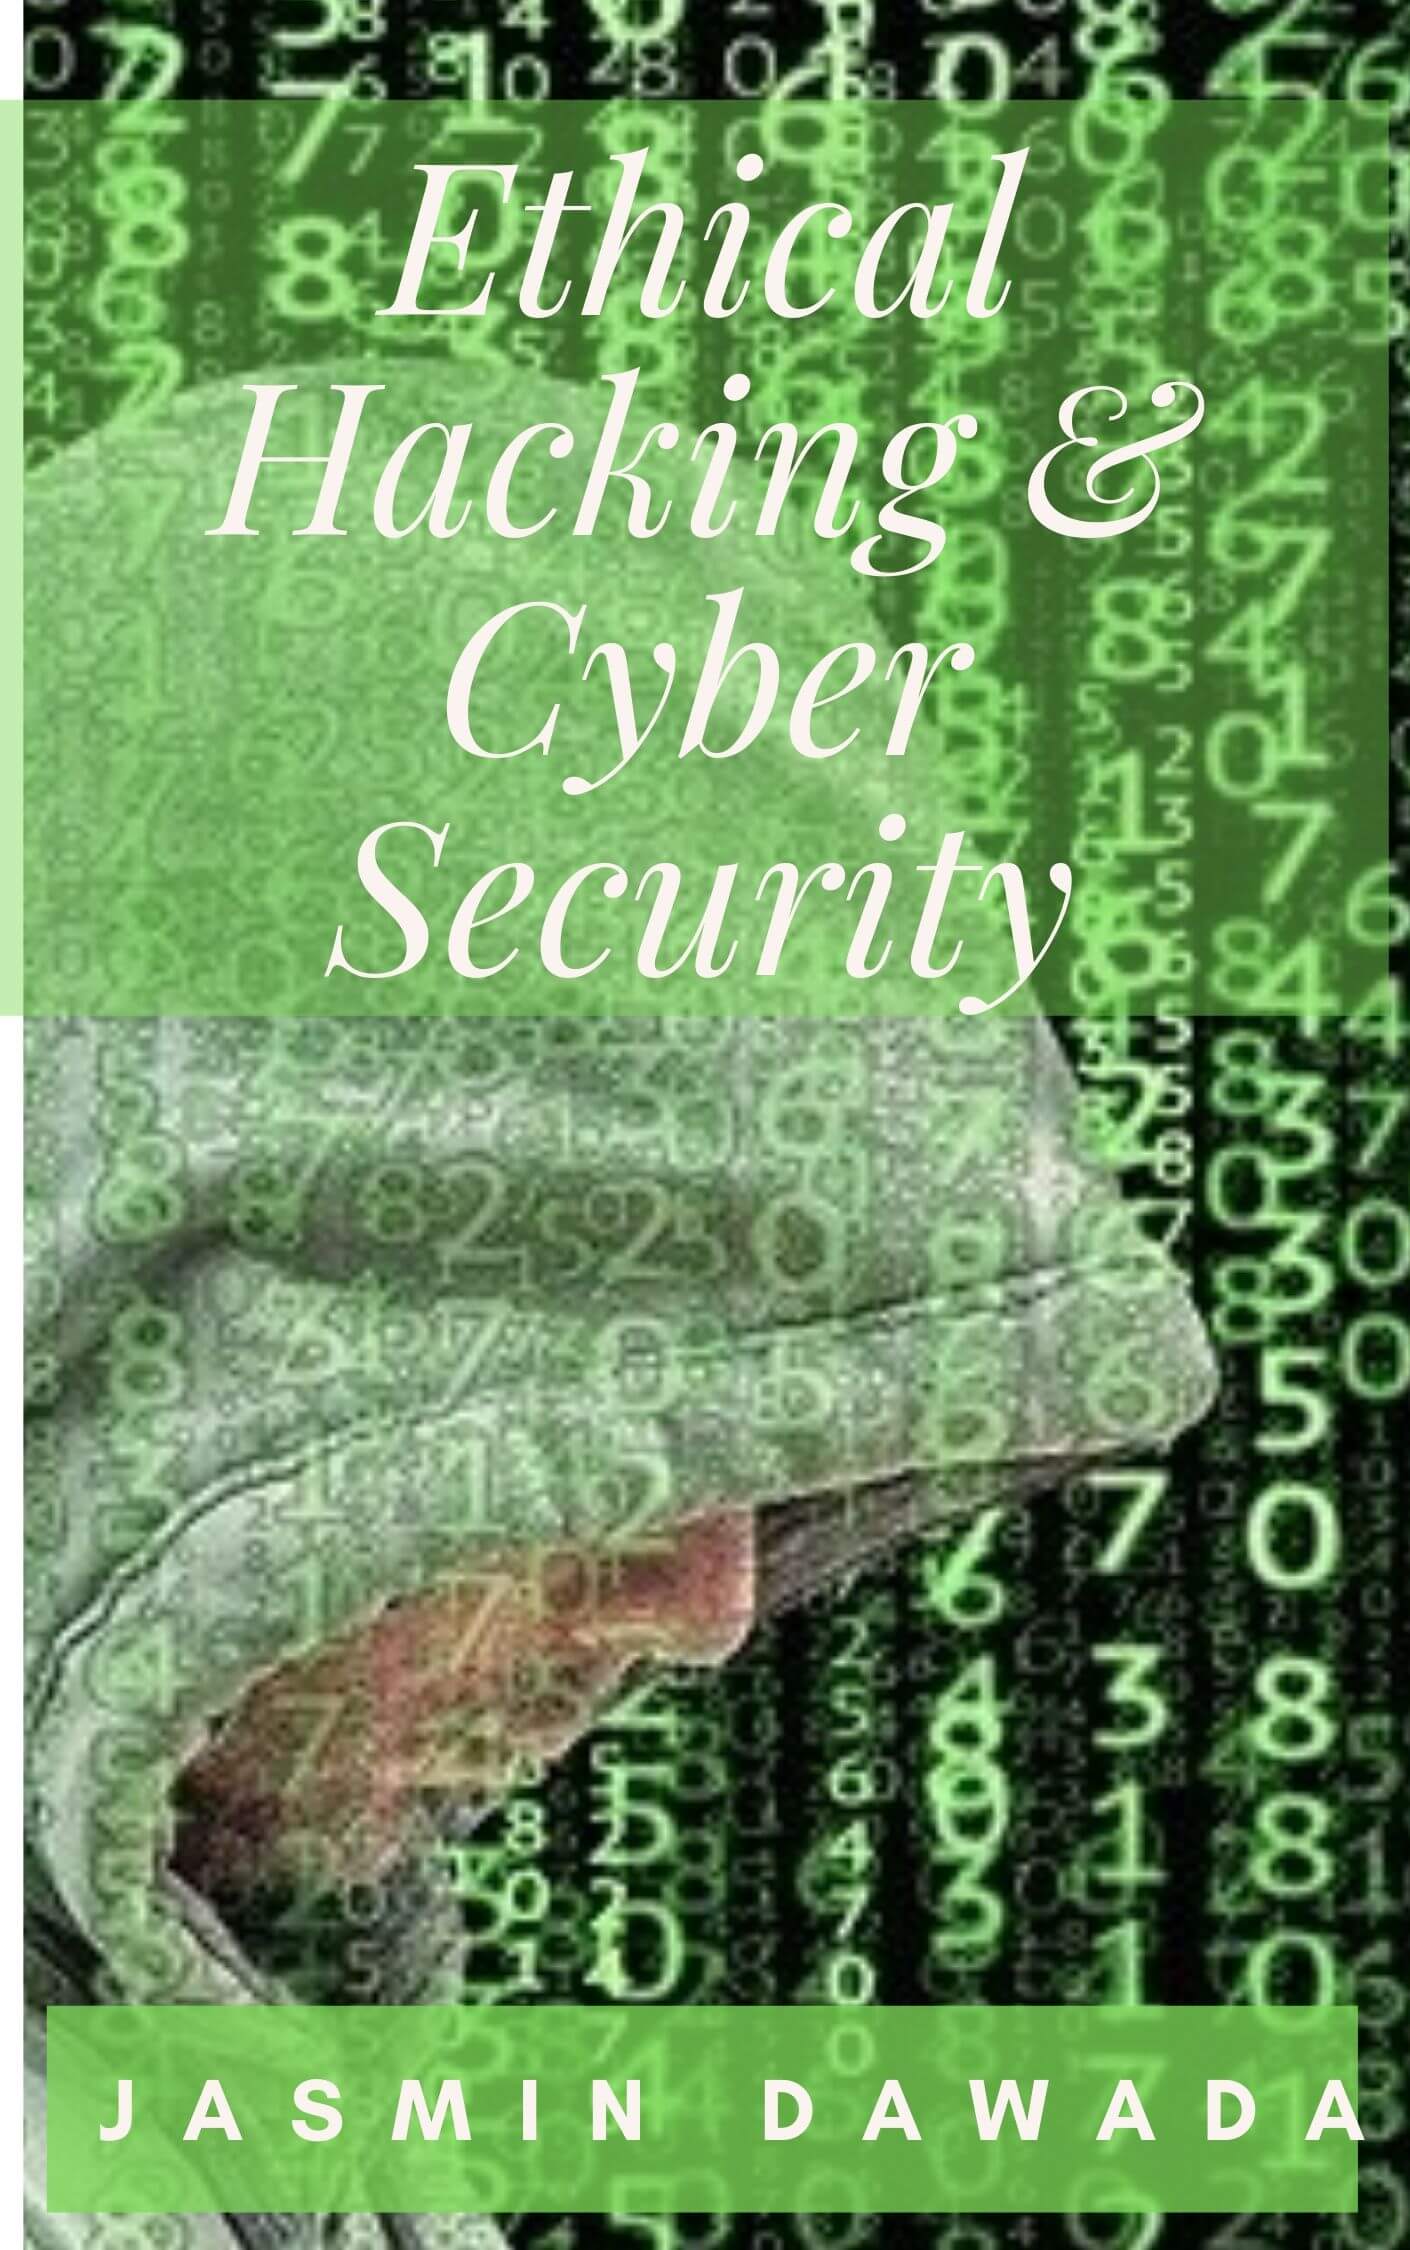 Jasmin Dawada's Book - Ethical Hacking & Cyber Security